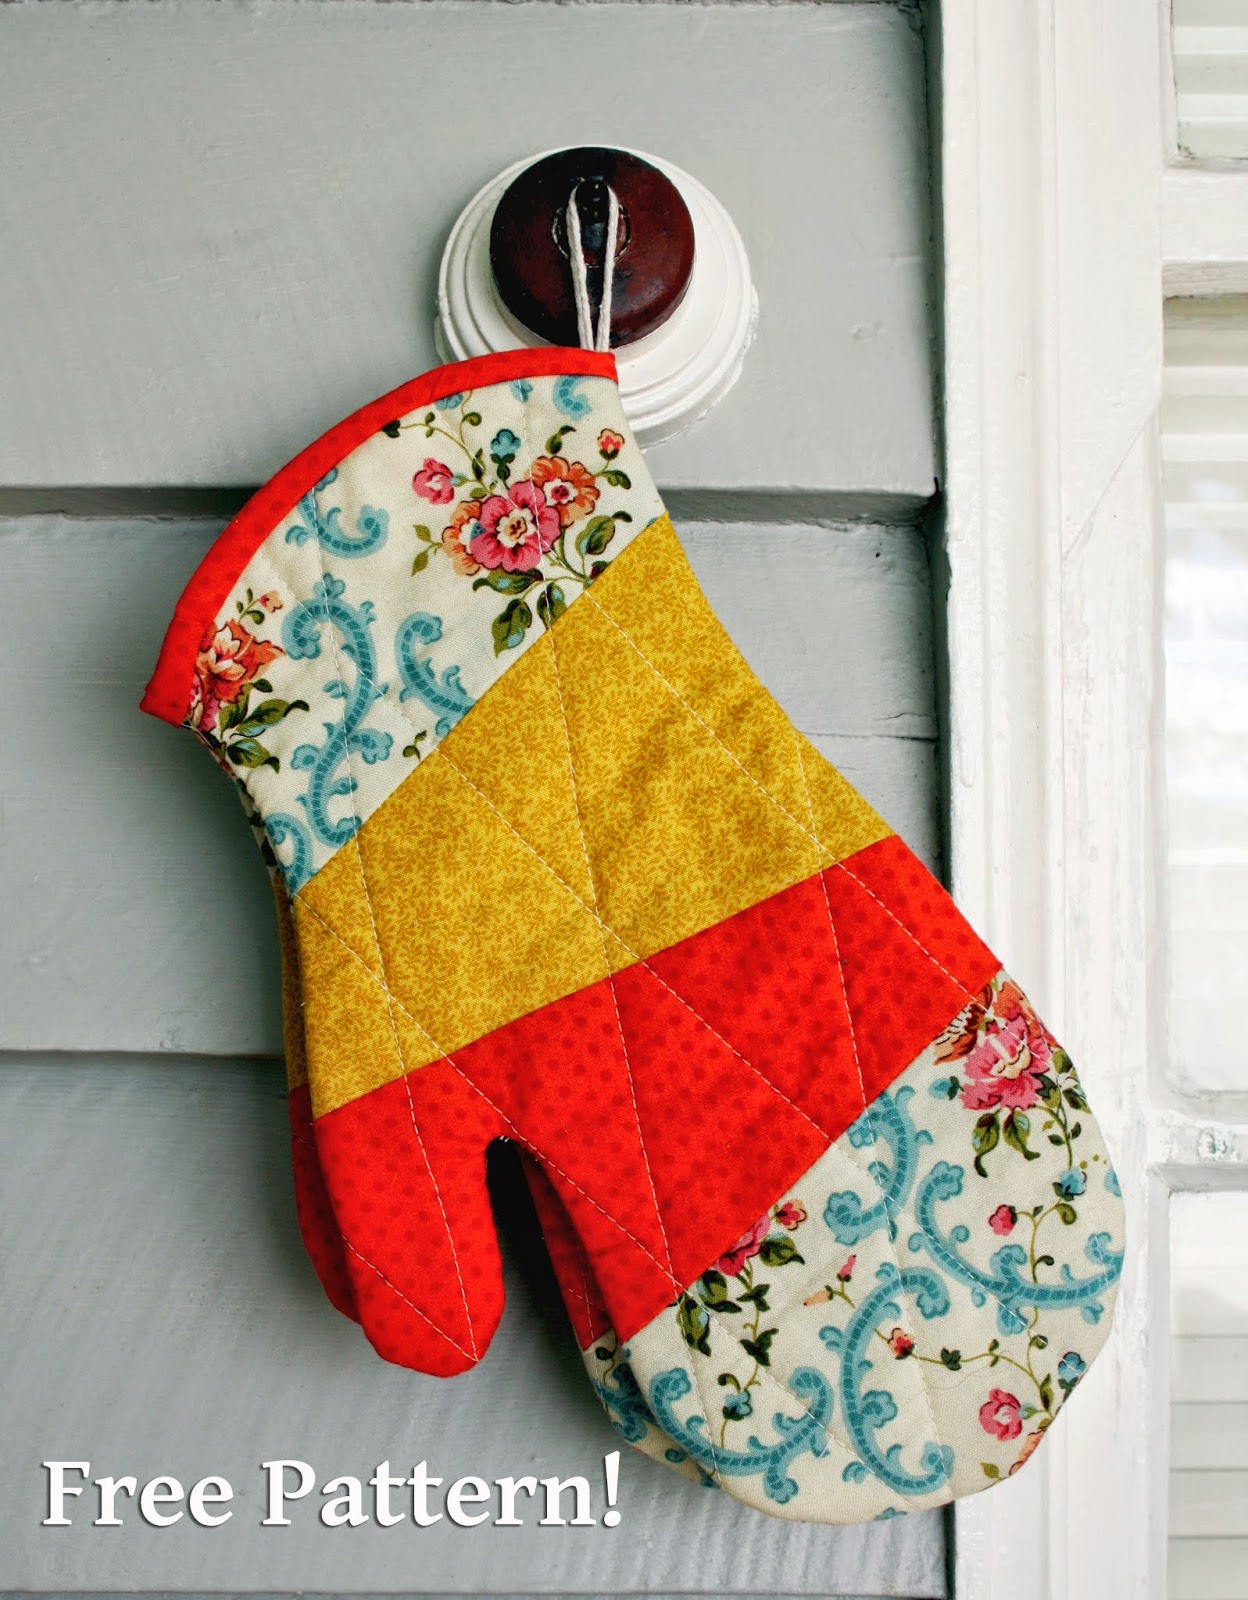 double oven mitts sewing tutorial from fabric scraps - patchwork